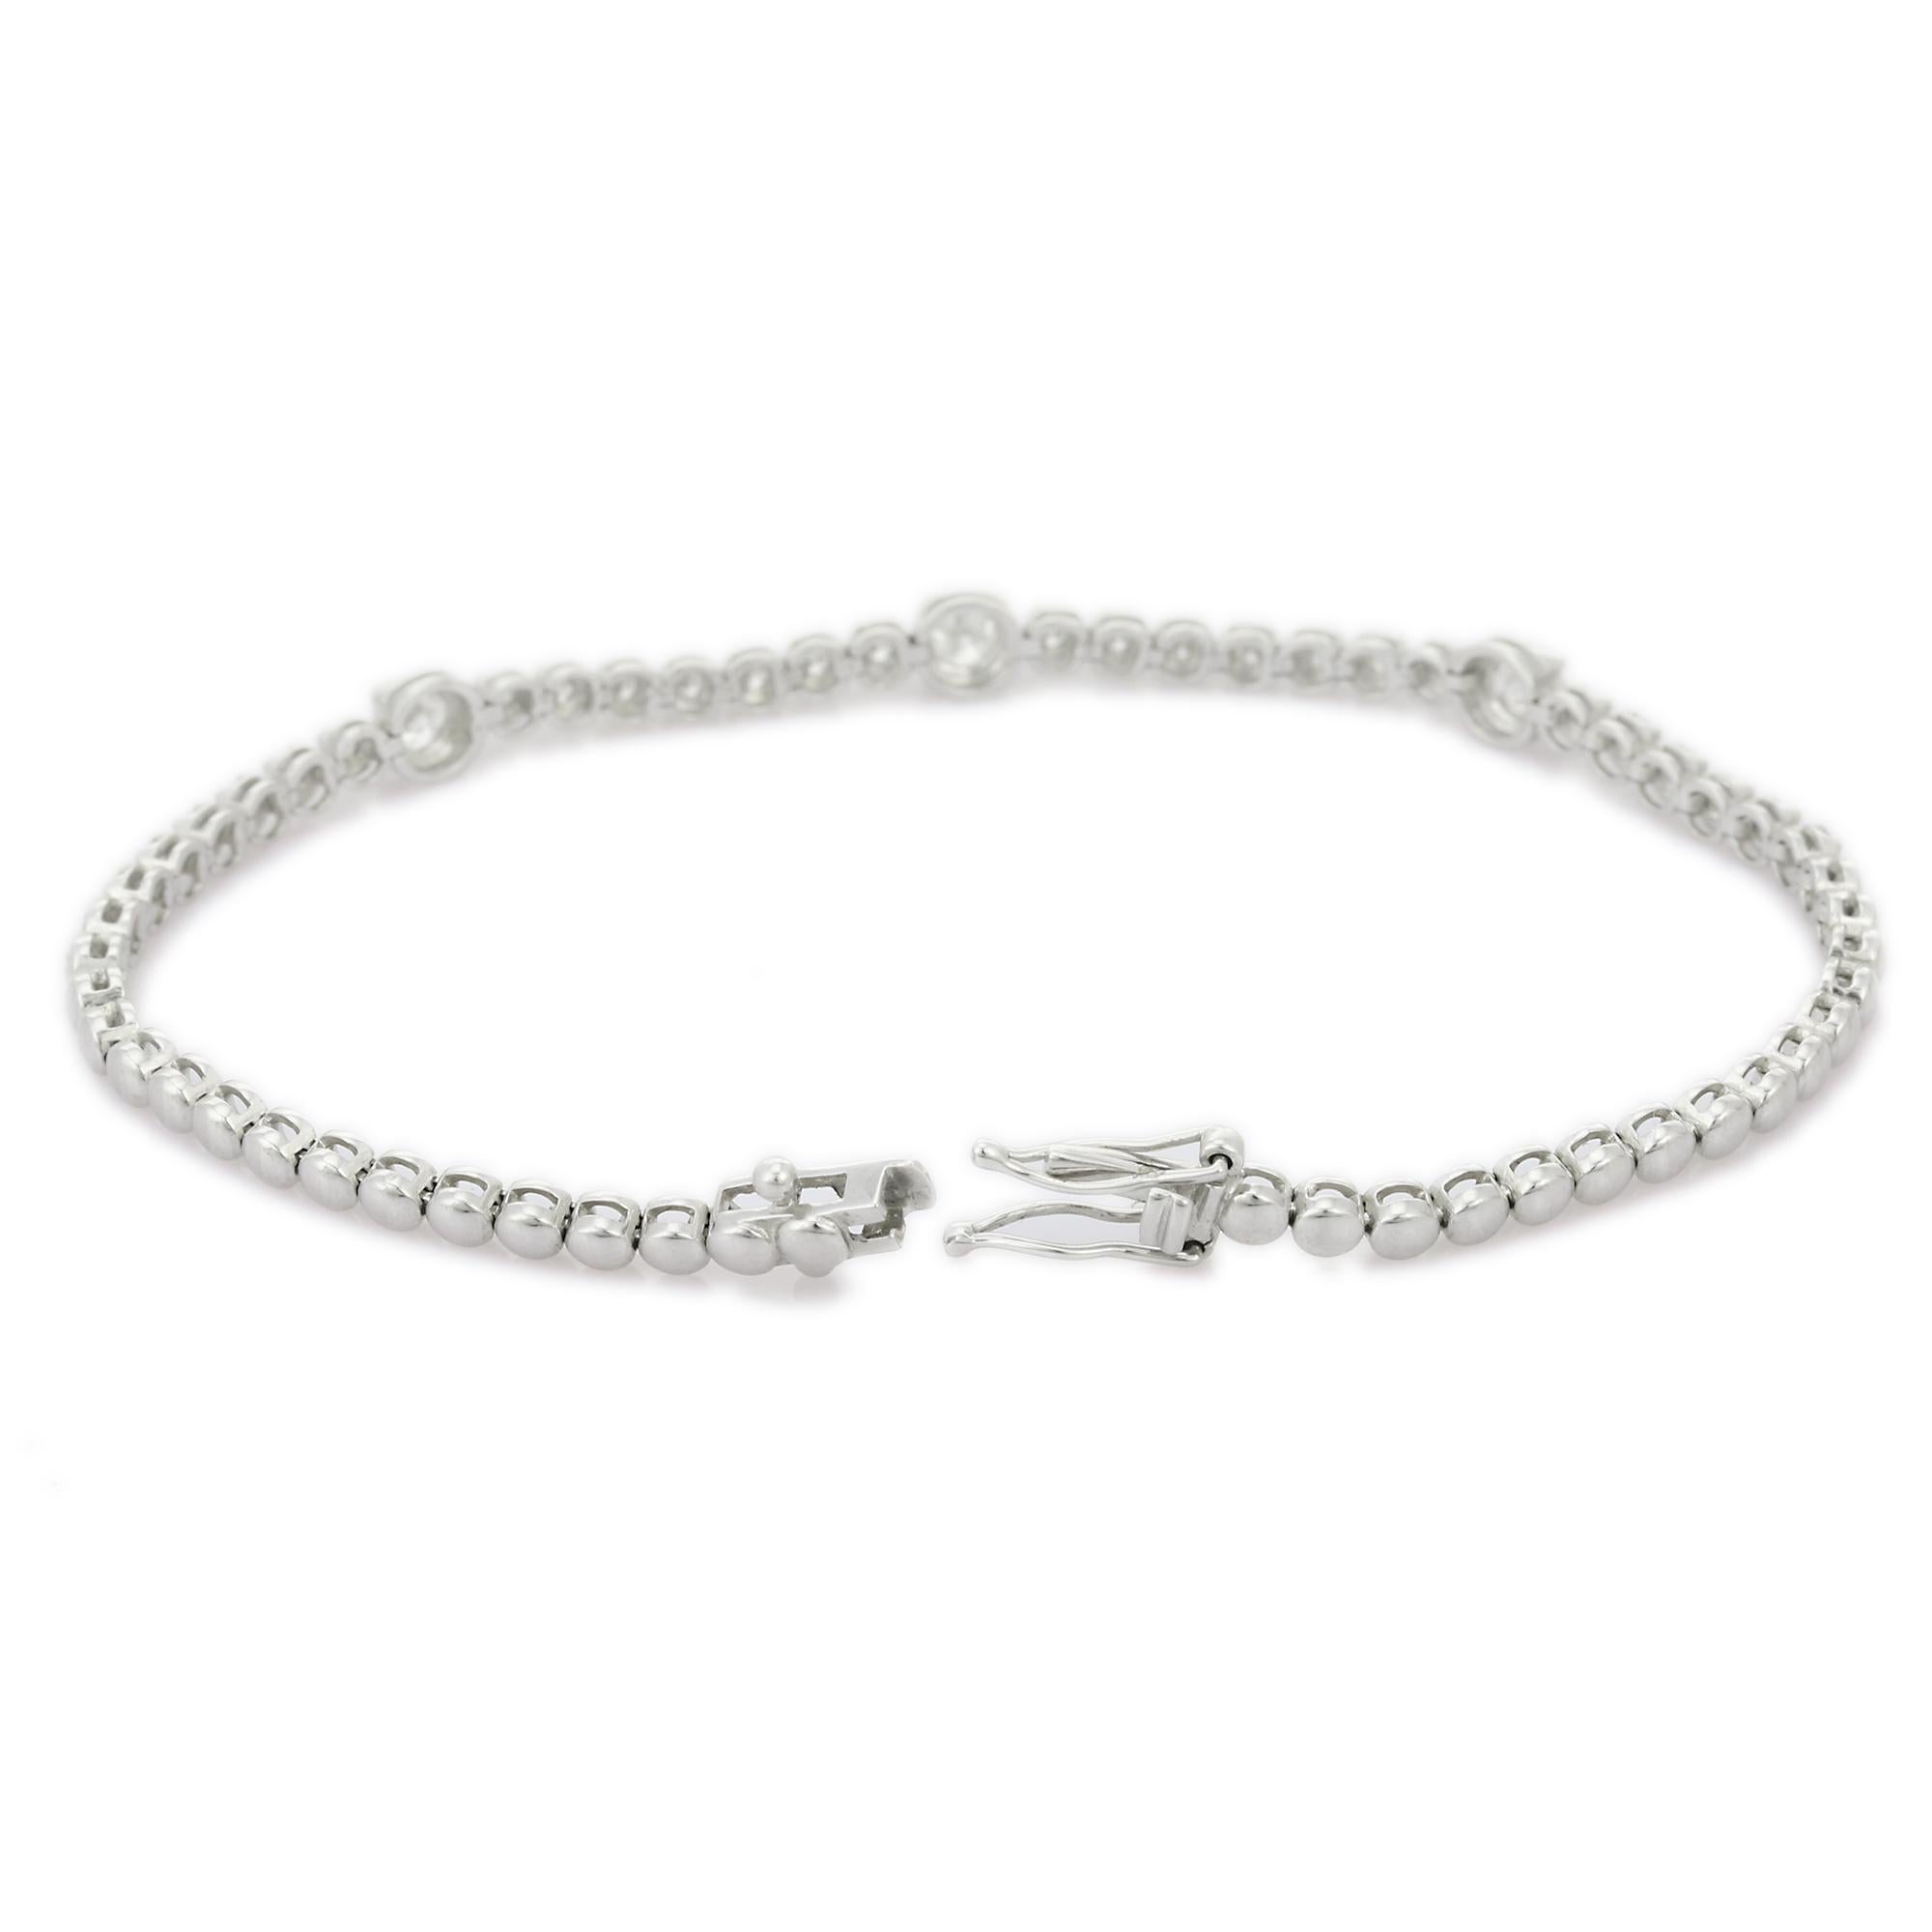 Diamond bracelet in 18K Gold. It has a perfect round cut diamonds to make you stand out on any occasion or an event.
A tennis bracelet is an essential piece of jewelry when it comes to your wedding day. The sleek and elegant style complements the